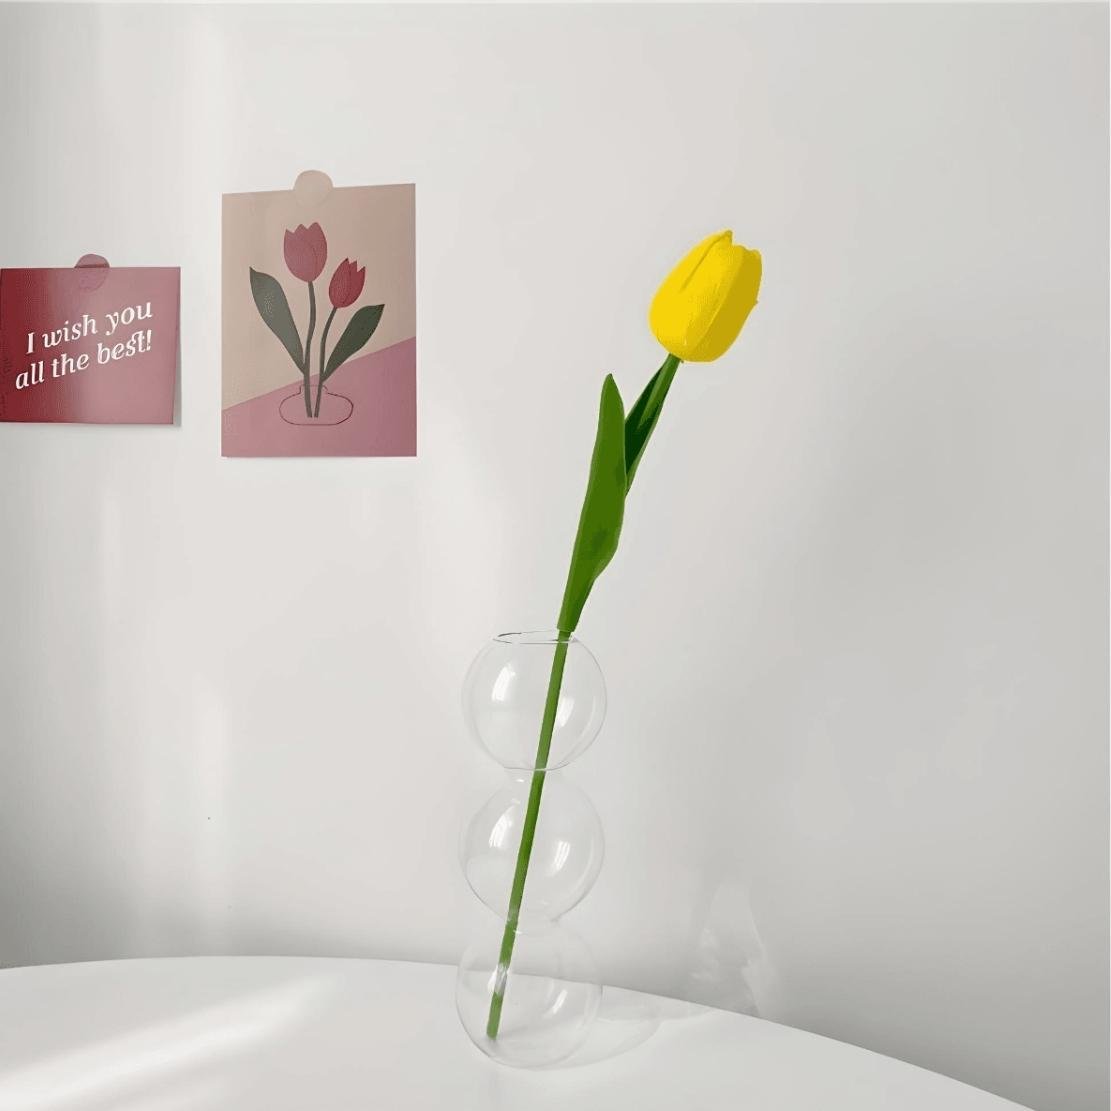 Transparent, layered glass ball vase with yellow tulip